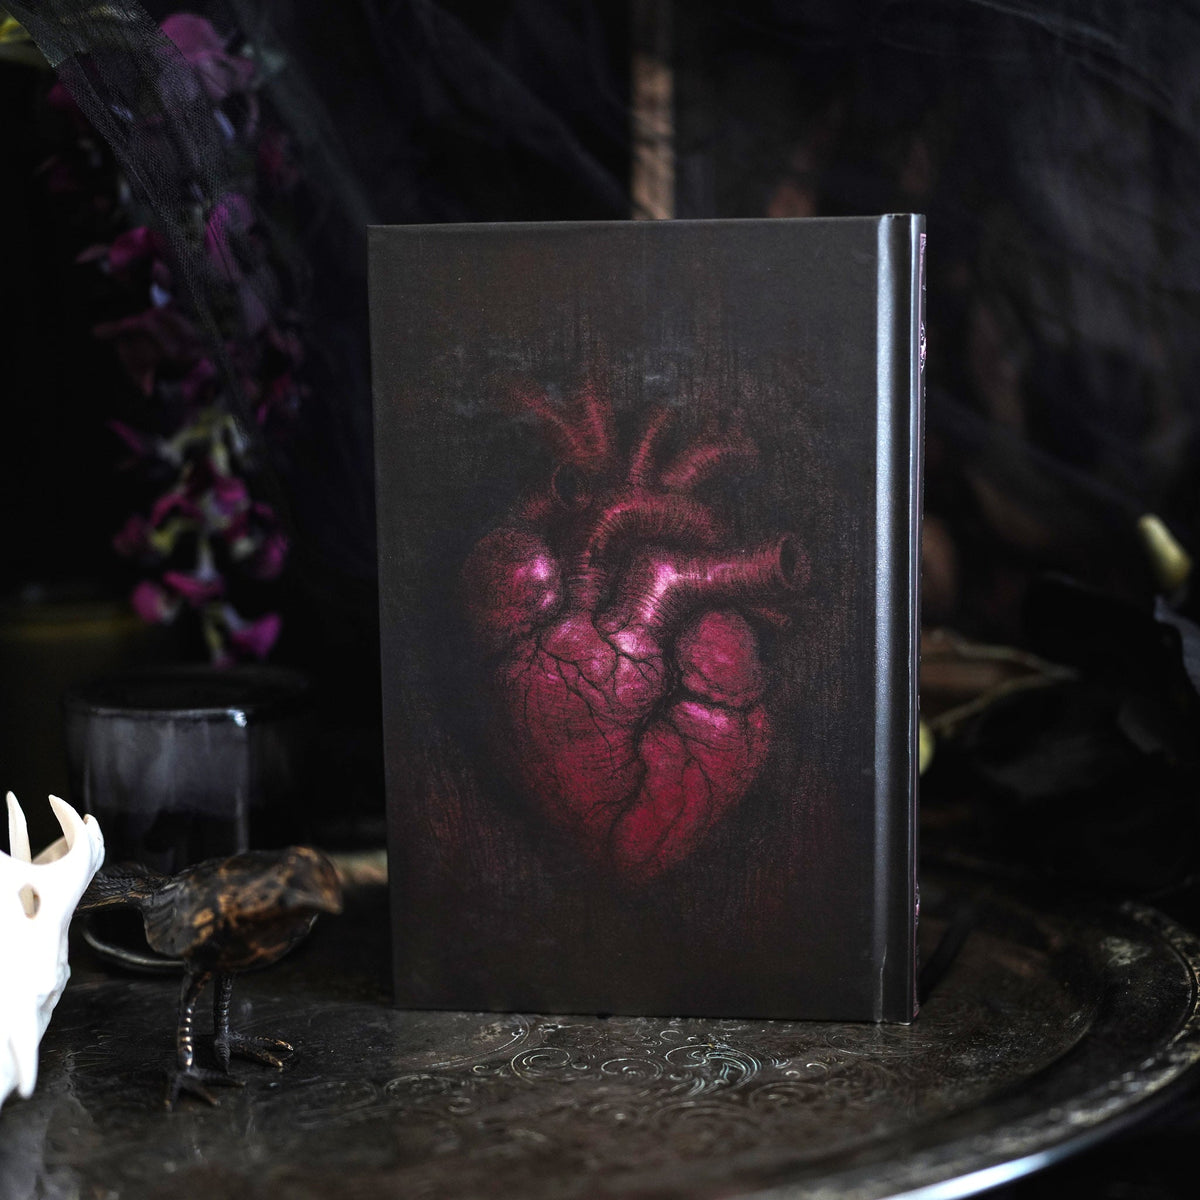 Gothic Horror Box Set with BONUS Slipcase from LitJoy Crate | Collectibles &amp; Gifts for Booklovers